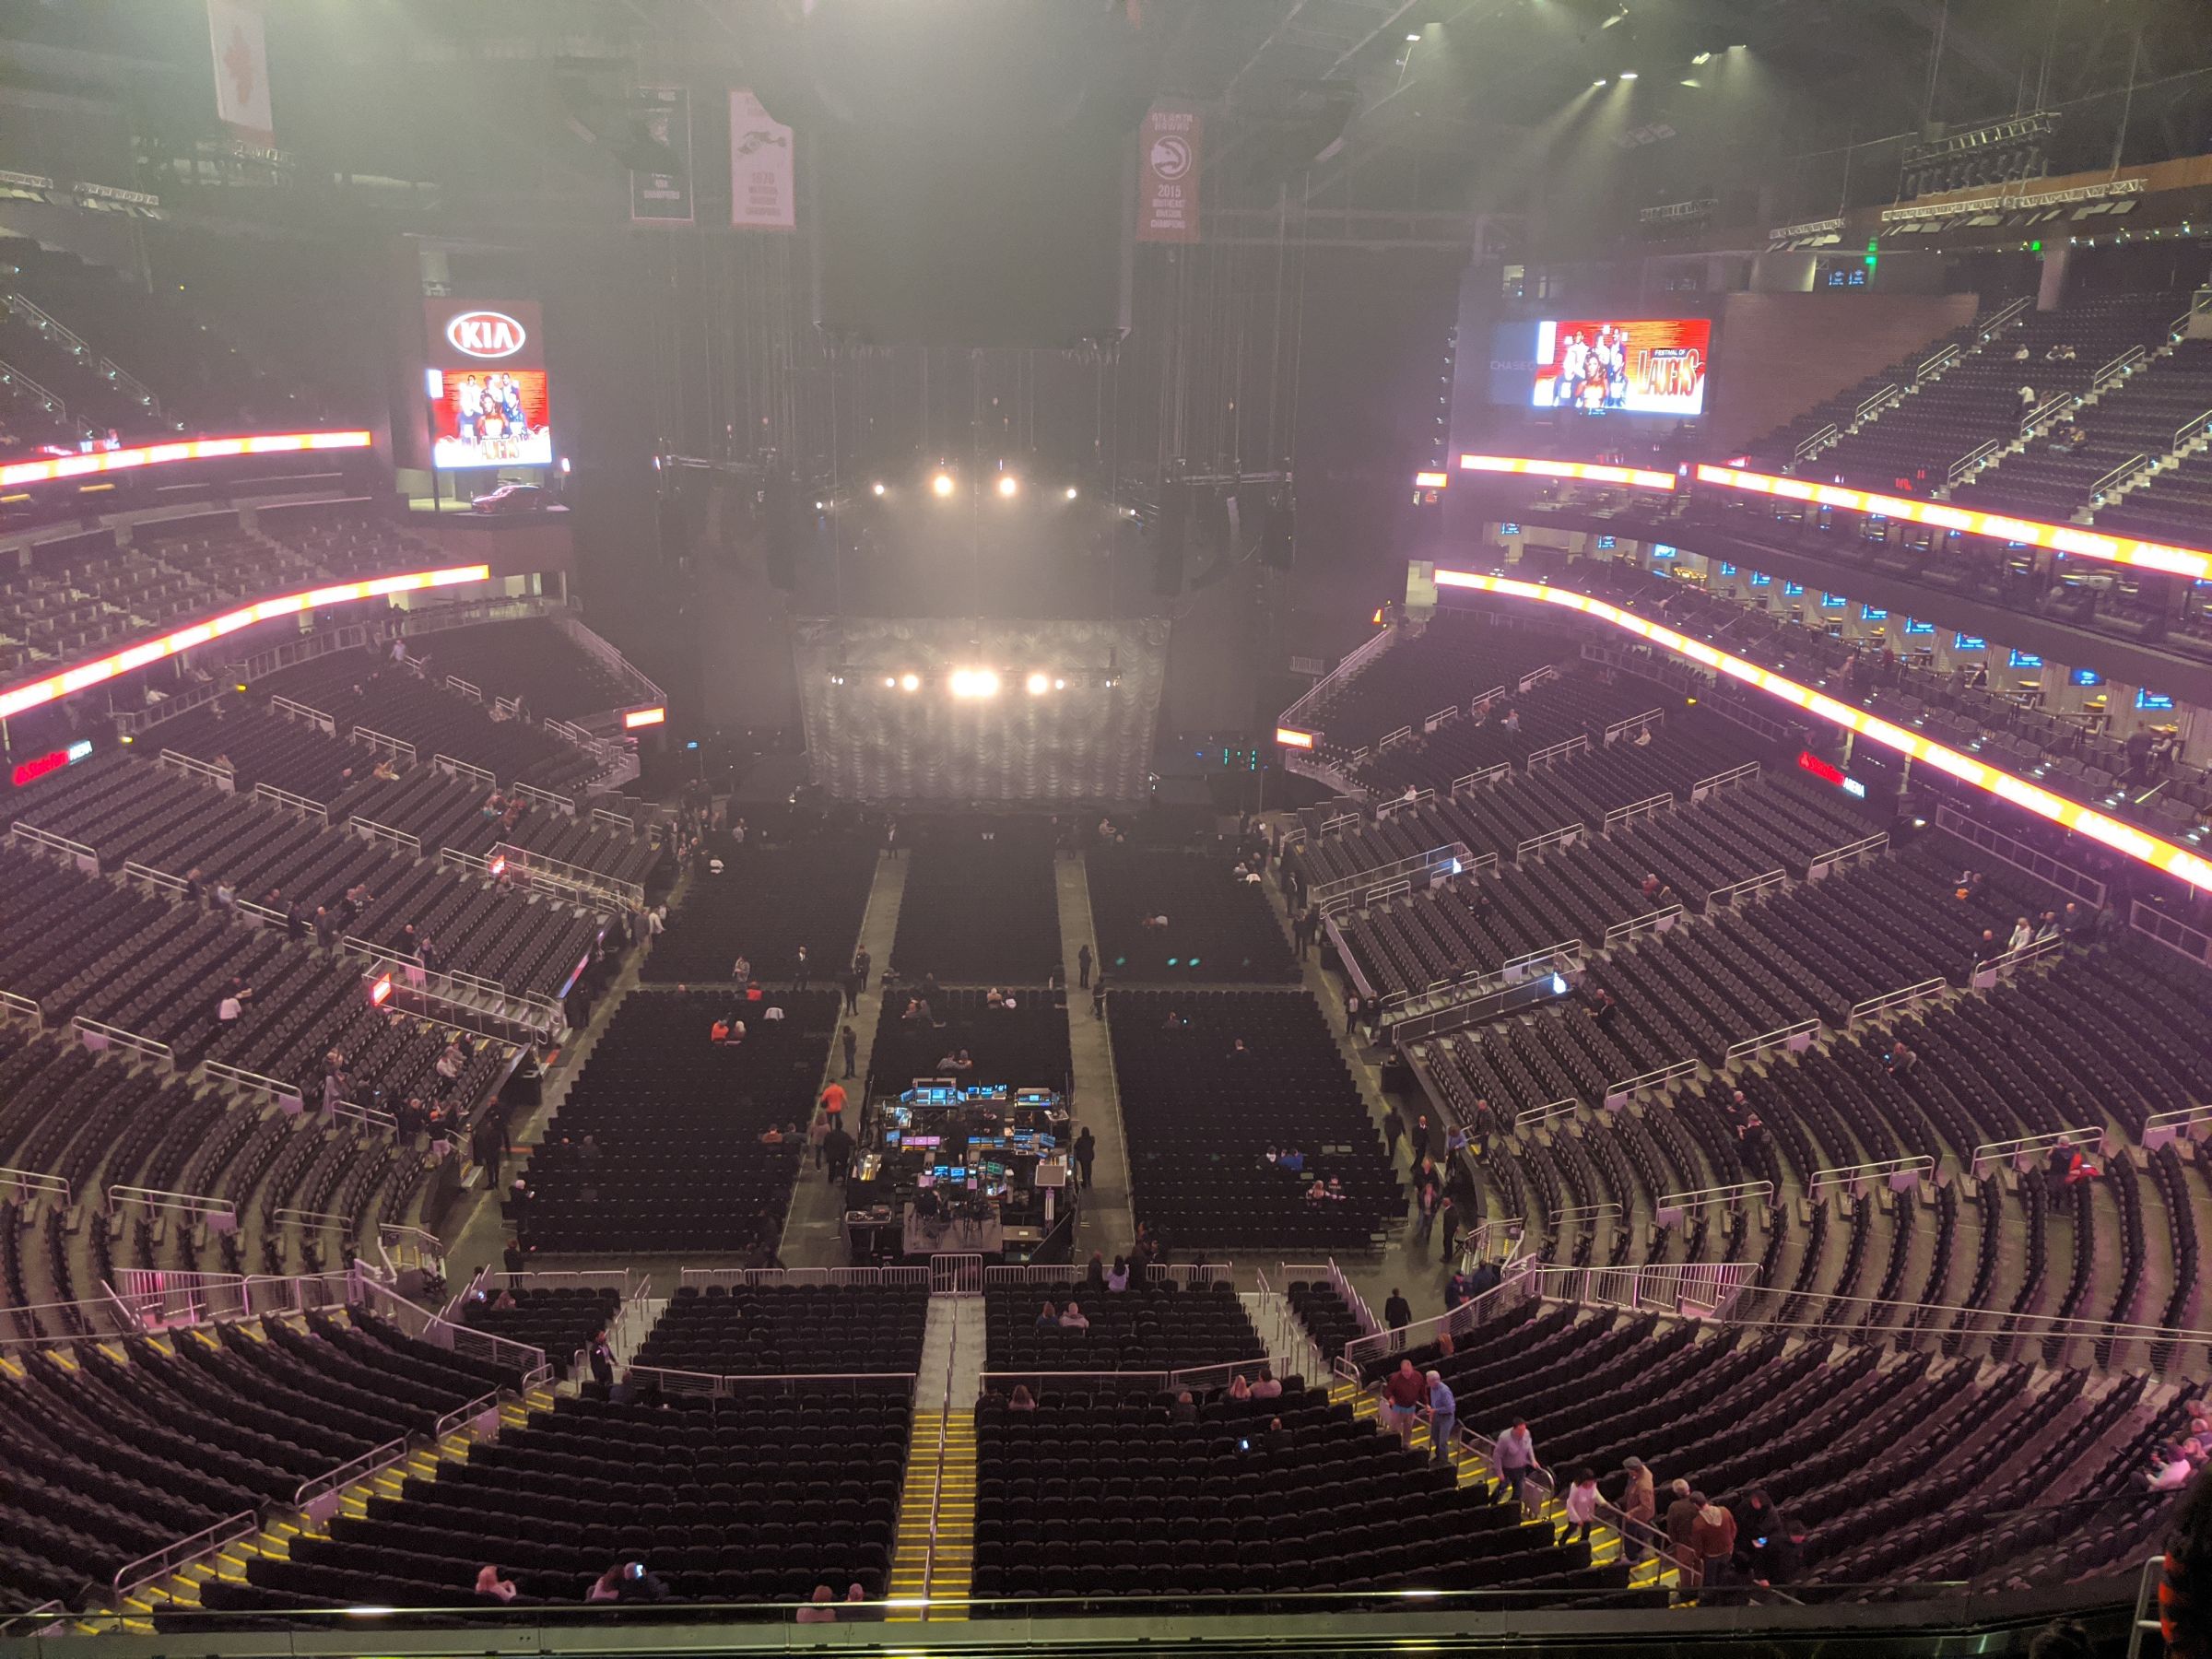 Section 203 at State Farm Arena for Concerts